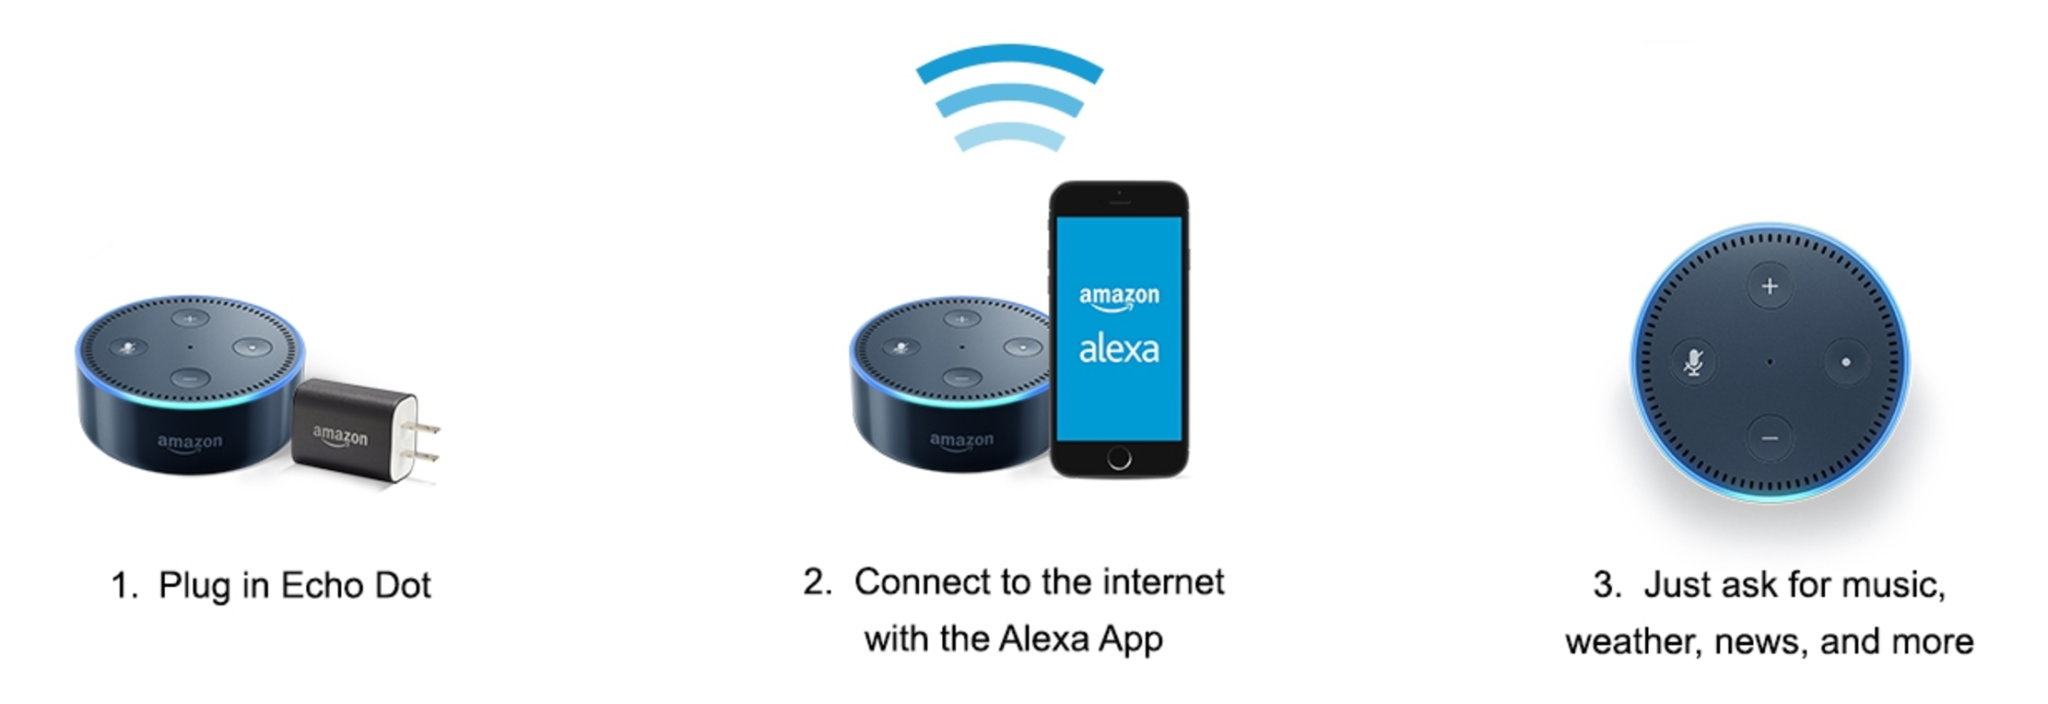 Echo Dot (2nd Generation) is a hands-free, voice-controlled device that uses Alexa to play music, control smart home devices, make calls, send and receive messages, provide information, read the news, set alarms, read audiobooks from Audible, and more Connects to speakers or headphones through Bluetooth or 3.5 mm stereo cable to play music from Amazon Music, Spotify, Pandora, iHeartRadio, and TuneIn Introducing Alexa calling and messaging, a new way to be together with family and friends. Just ask Alexa to call or message anyone with an Echo, Echo Dot, or the Alexa App. Controls lights, fans, switches, thermostats, garage doors, sprinklers, locks, and more with compatible connected devices from WeMo, Philips Hue, Samsung SmartThings, Nest, ecobee, and others Hears you from across the room with 7 far-field microphones for hands-free control, even in noisy environments or while playing music Includes a built-in speaker so it can work on its own as a smart alarm clock in the bedroom, an assistant in the kitchen, or anywhere you might want a voice-controlled computer; Amazon Echo is not required to use Echo Dot Always getting smarter and adding new features, plus thousands of skills like Uber, Domino's, DISH, and more